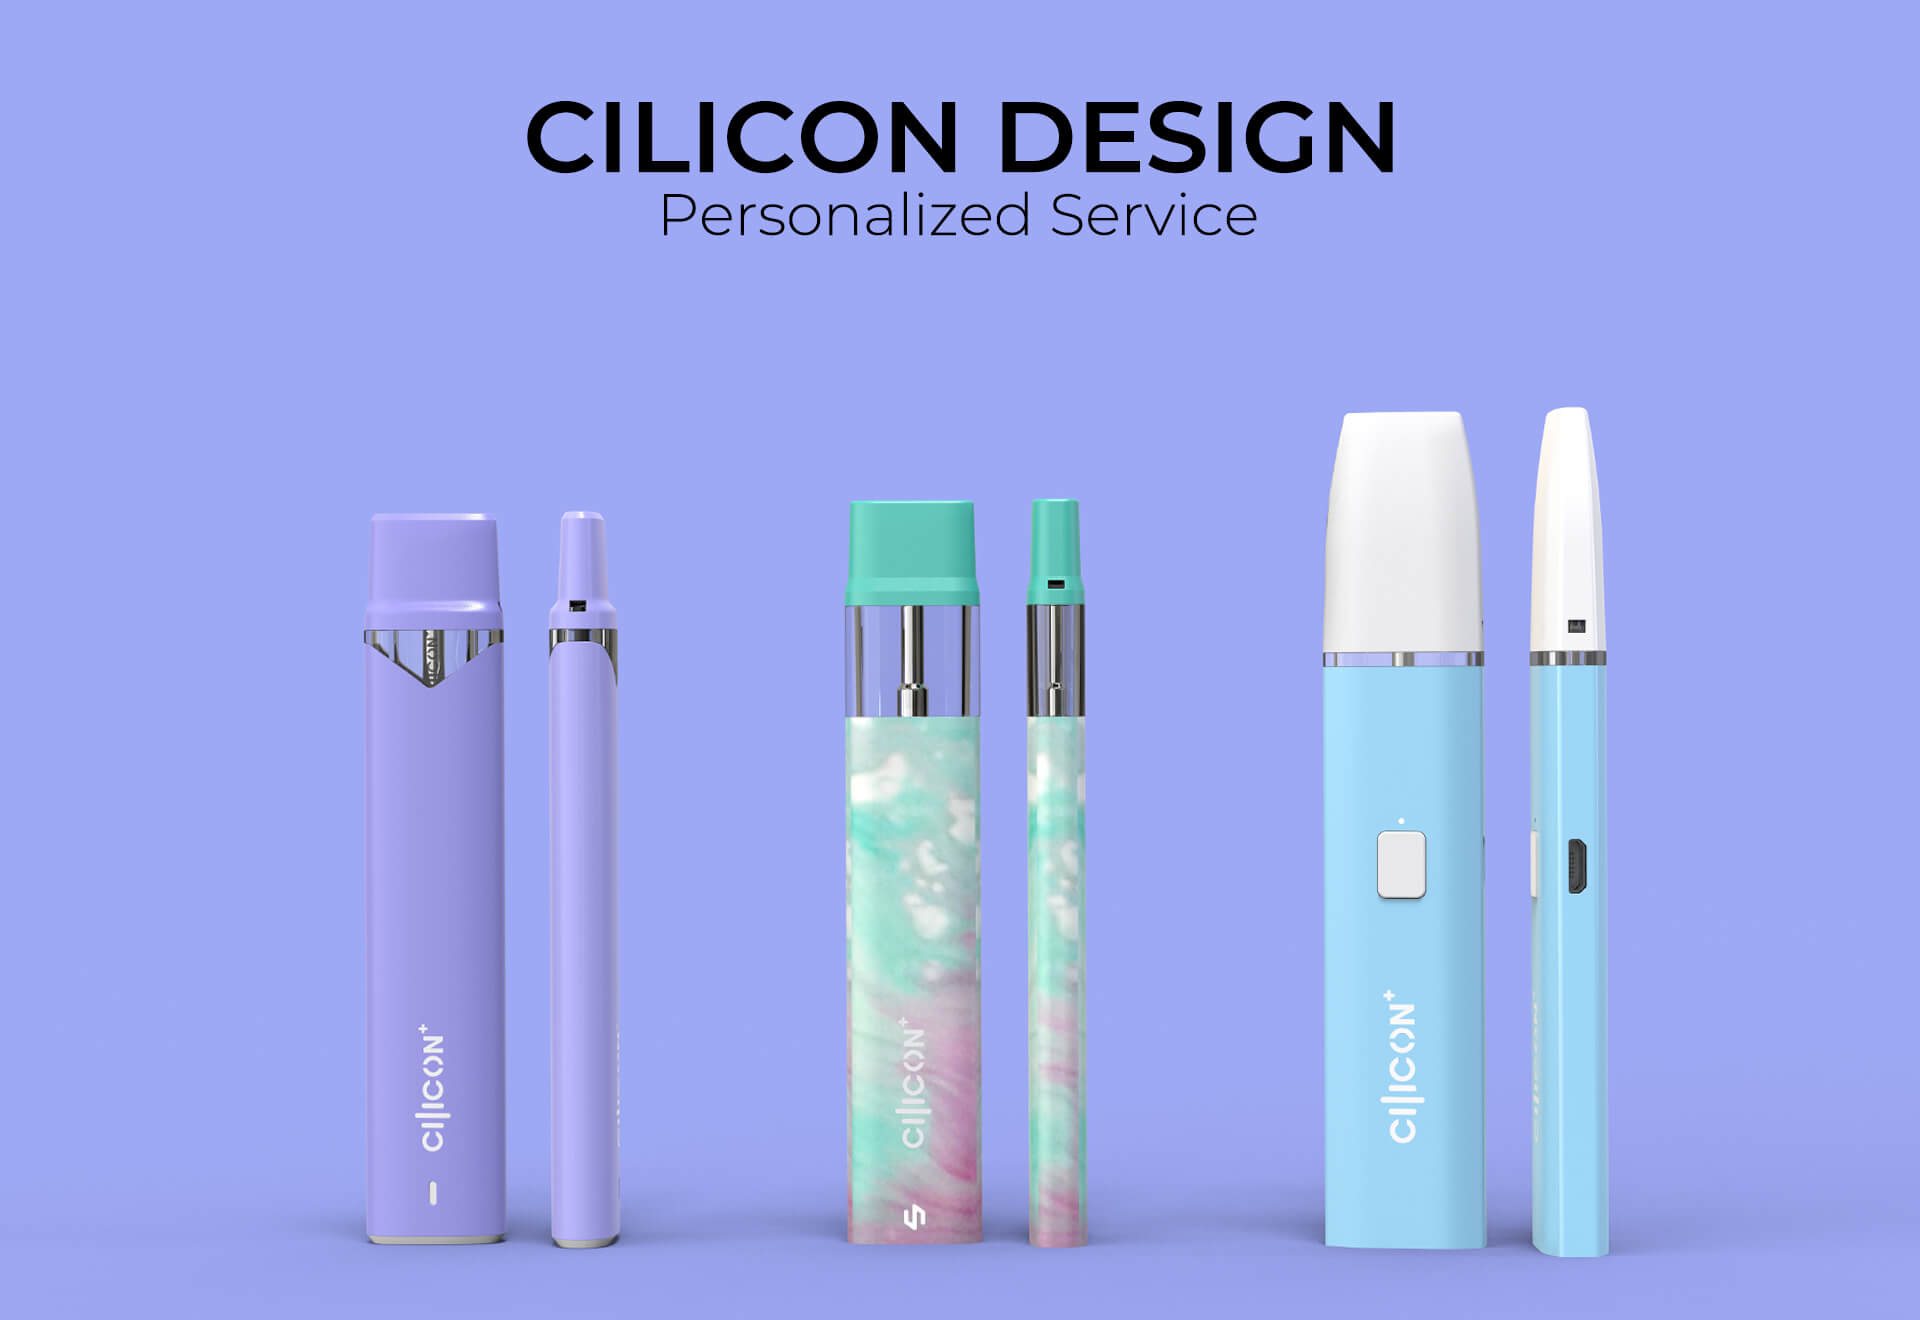 How to Succeed in Sourcing Your Cannabis Vaporizer Supplier - Cilicon